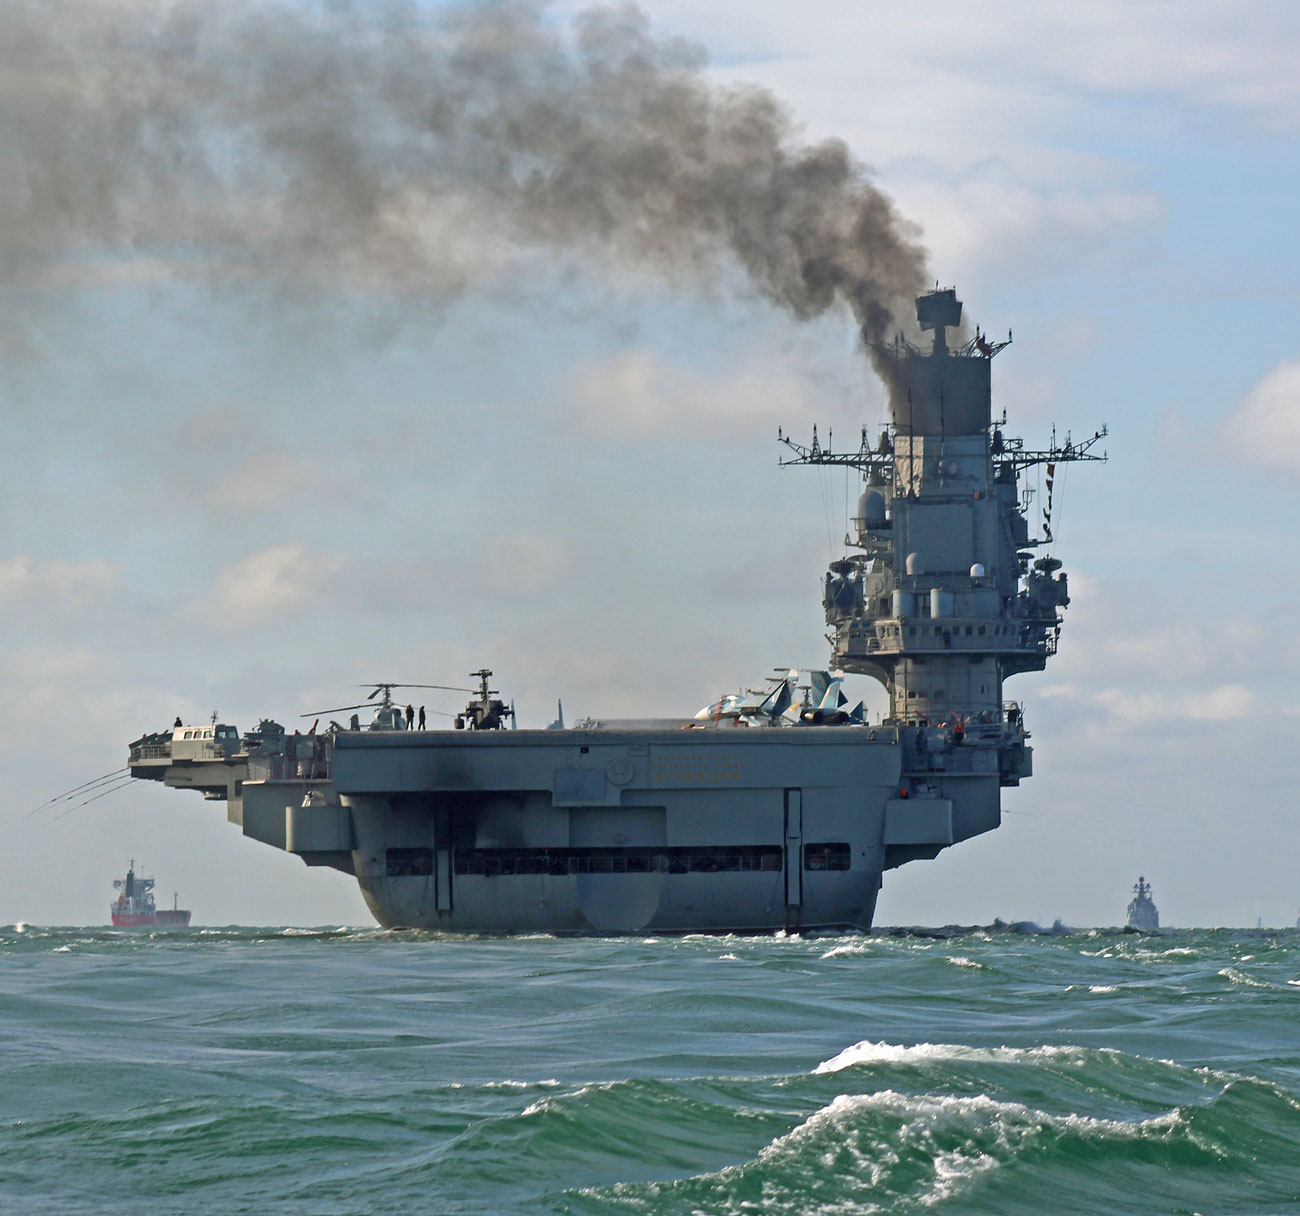 No threat: Admiral Kuznetsov is an aircraft cruiser launched in 1985 that serves as the flagship of the Russian Navy.